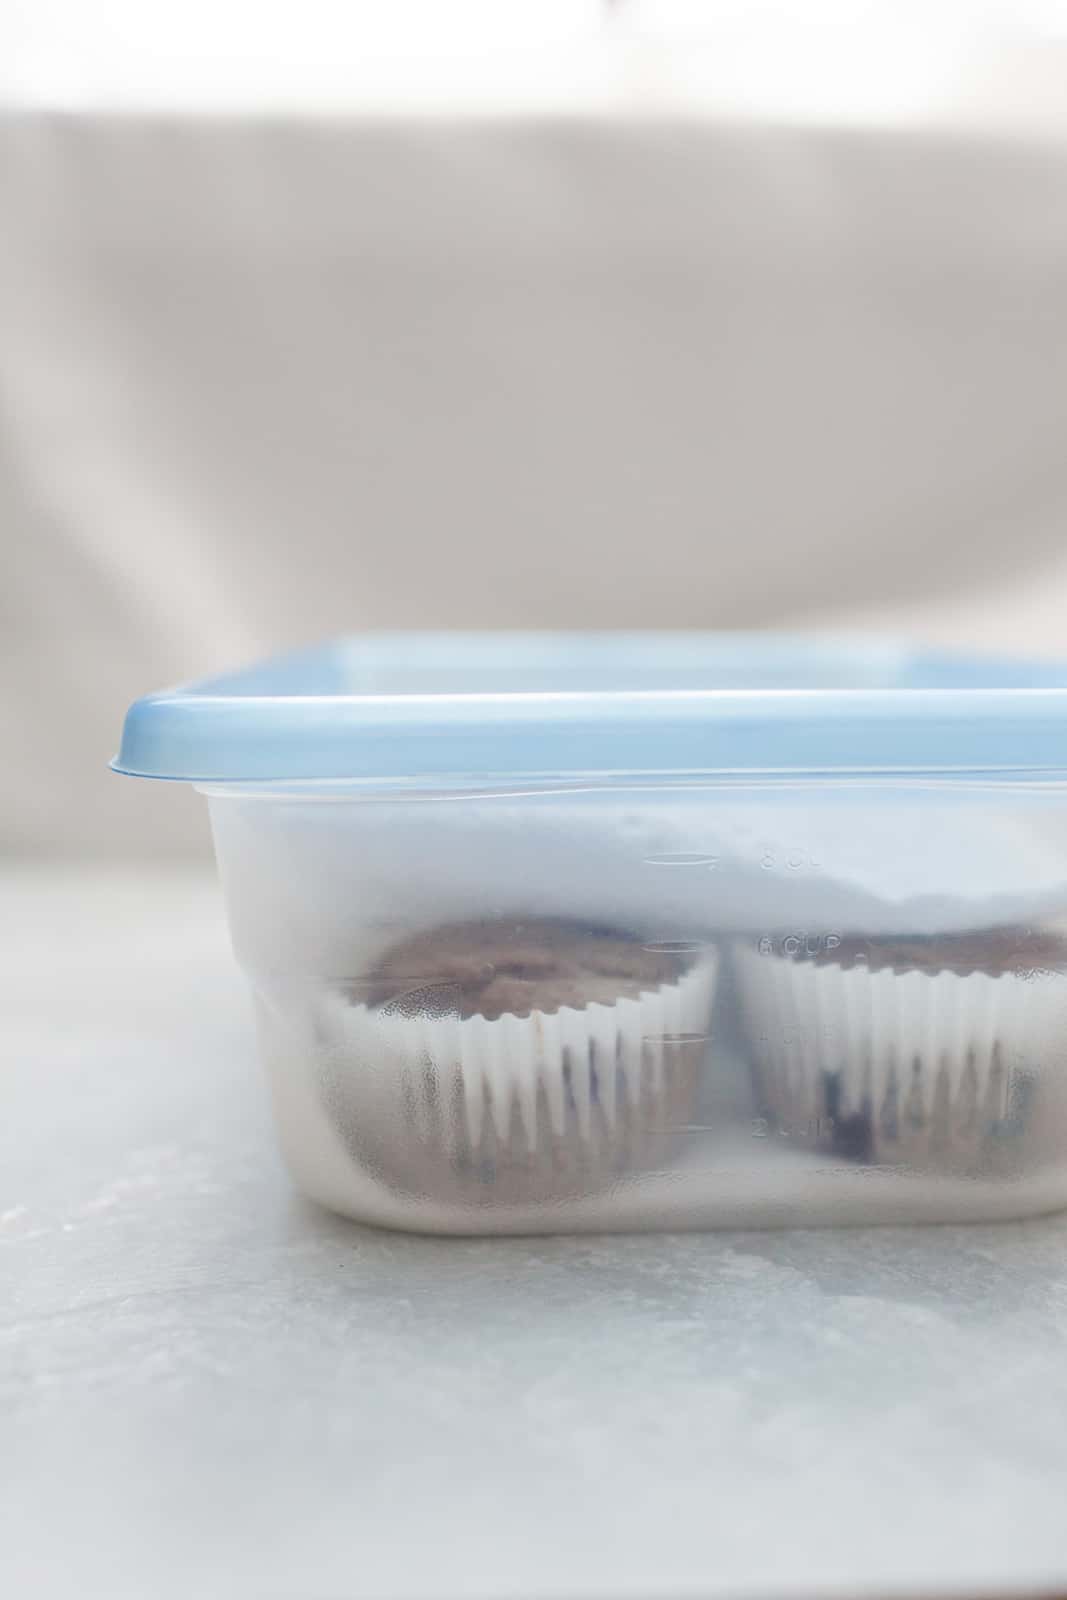 muffins in a sealed tupperware with paper towels